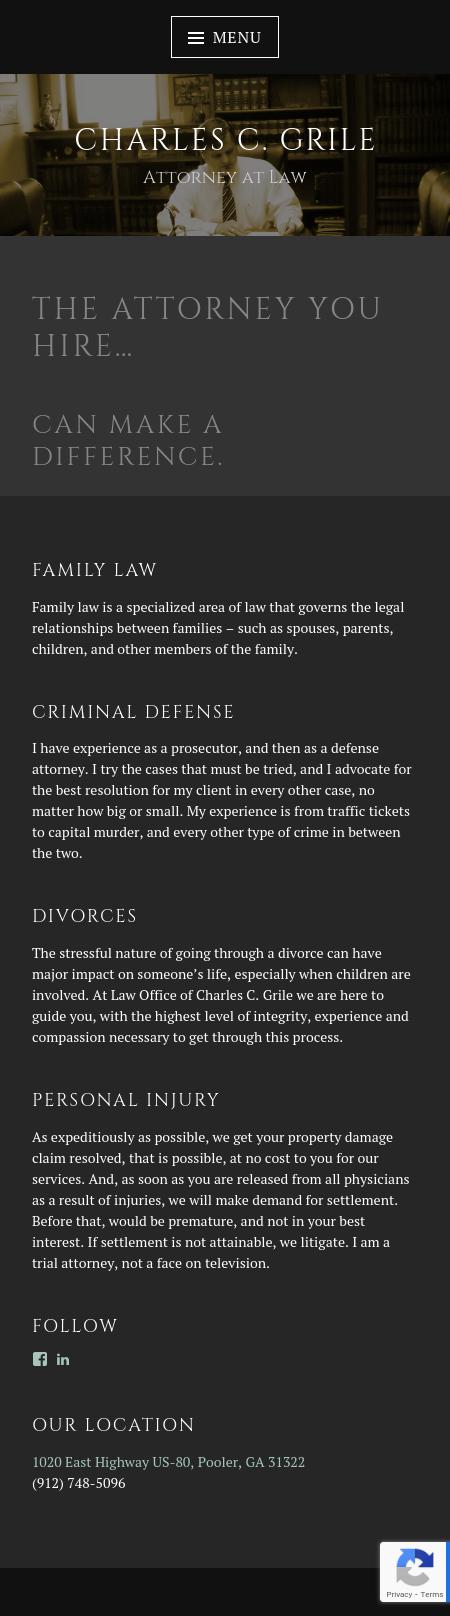 Grile Charles C Attorney at Law - Pooler GA Lawyers